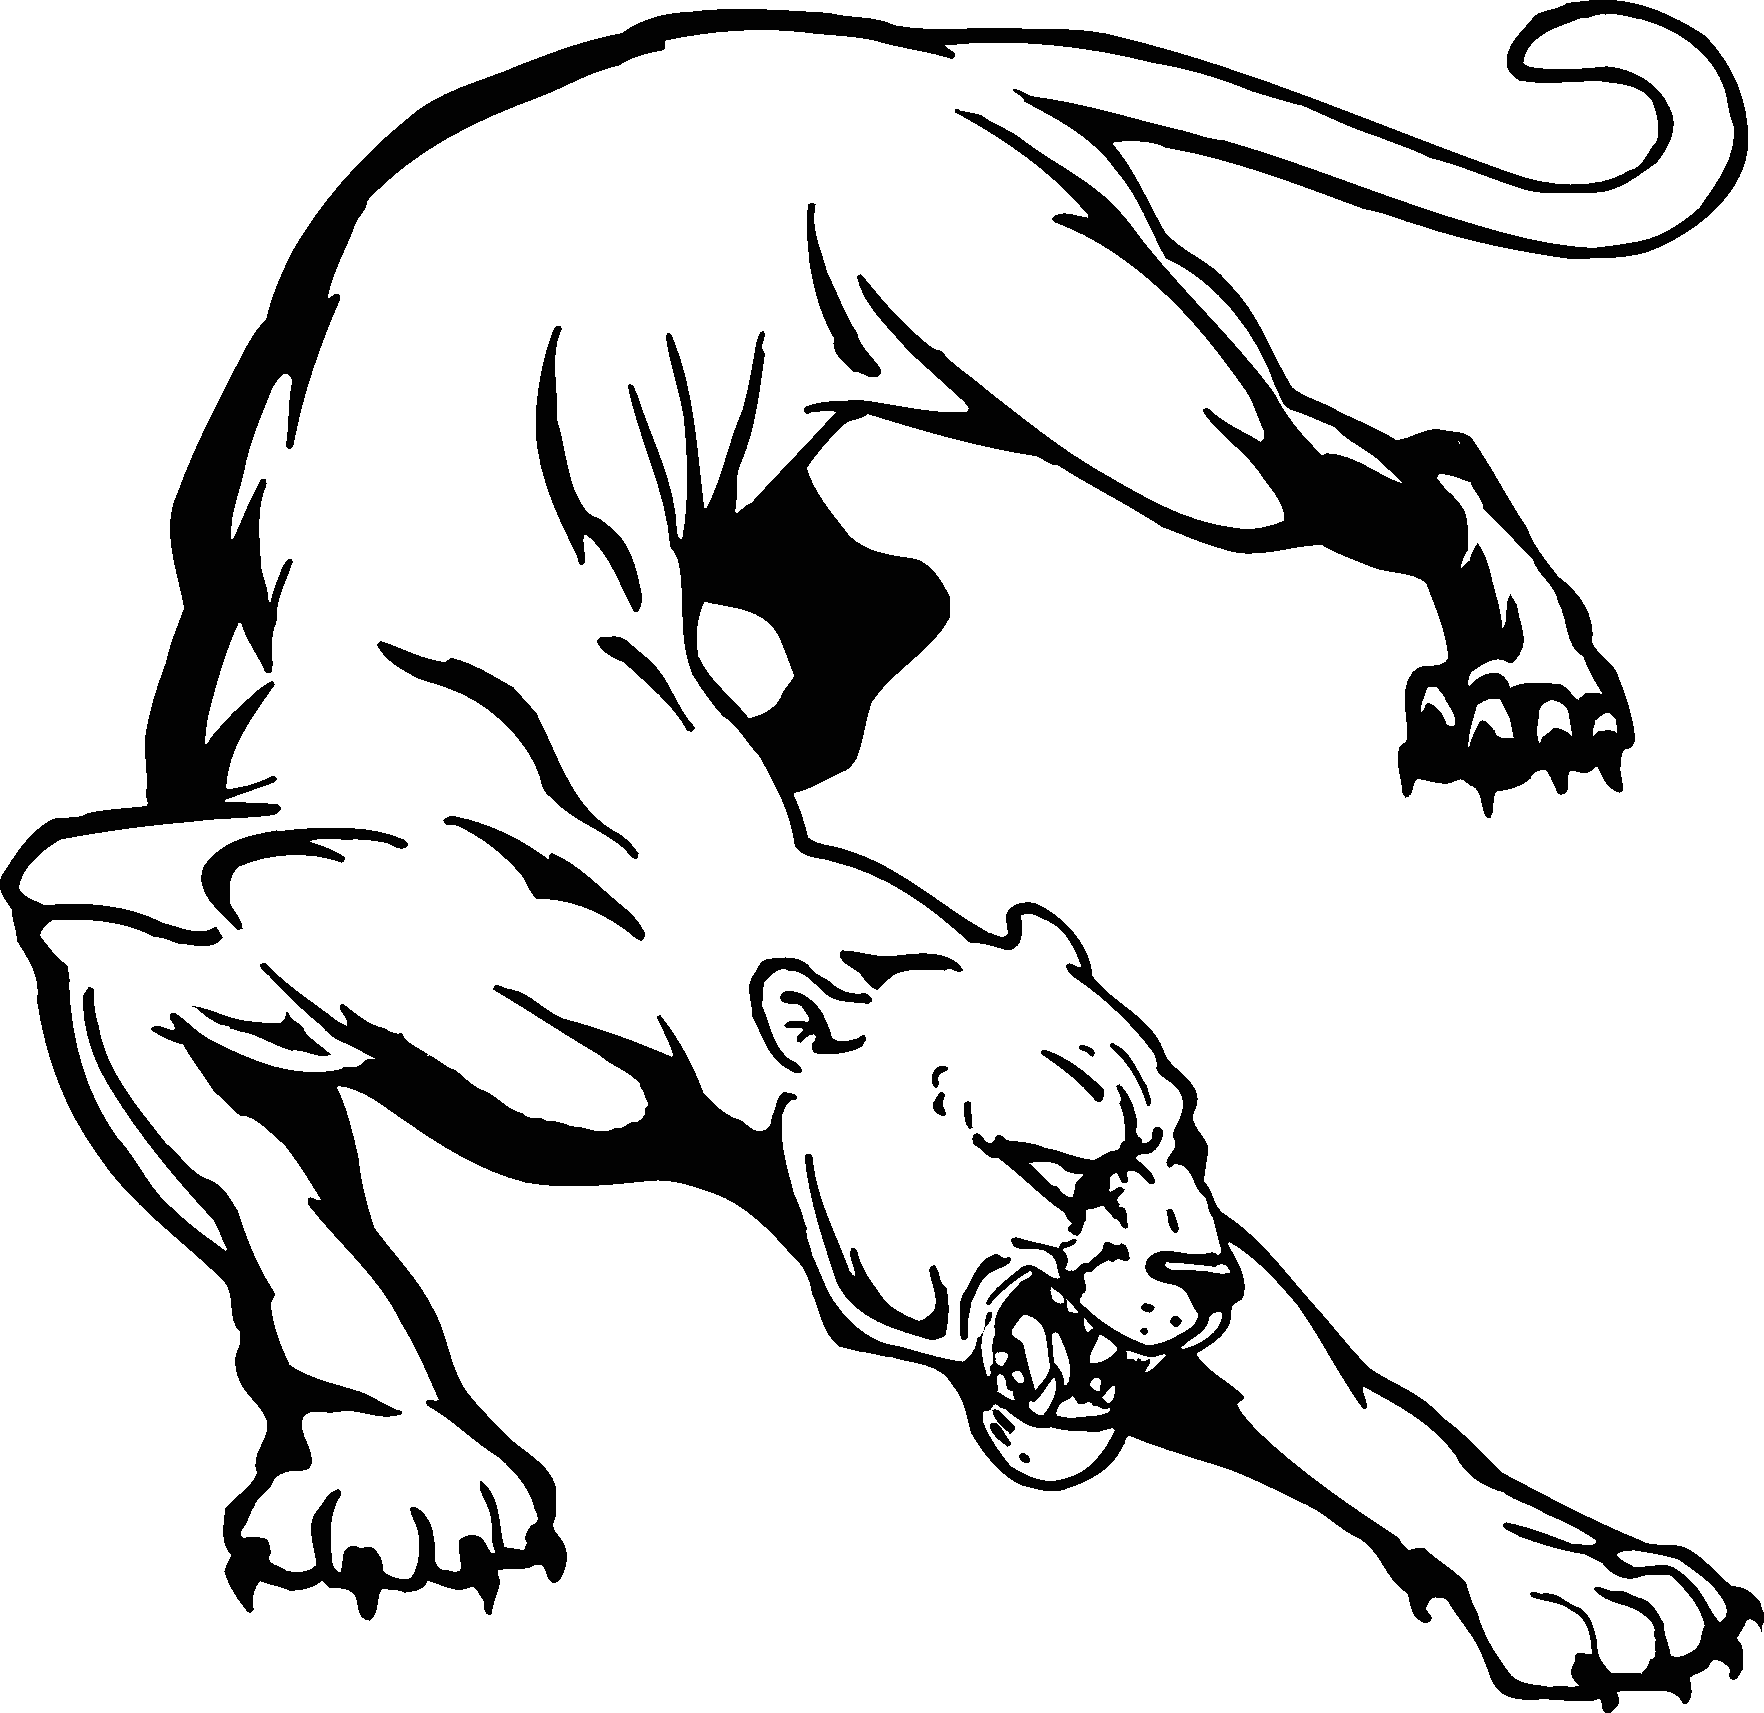 Panther Clip Art Mascots - Free Clipart Images